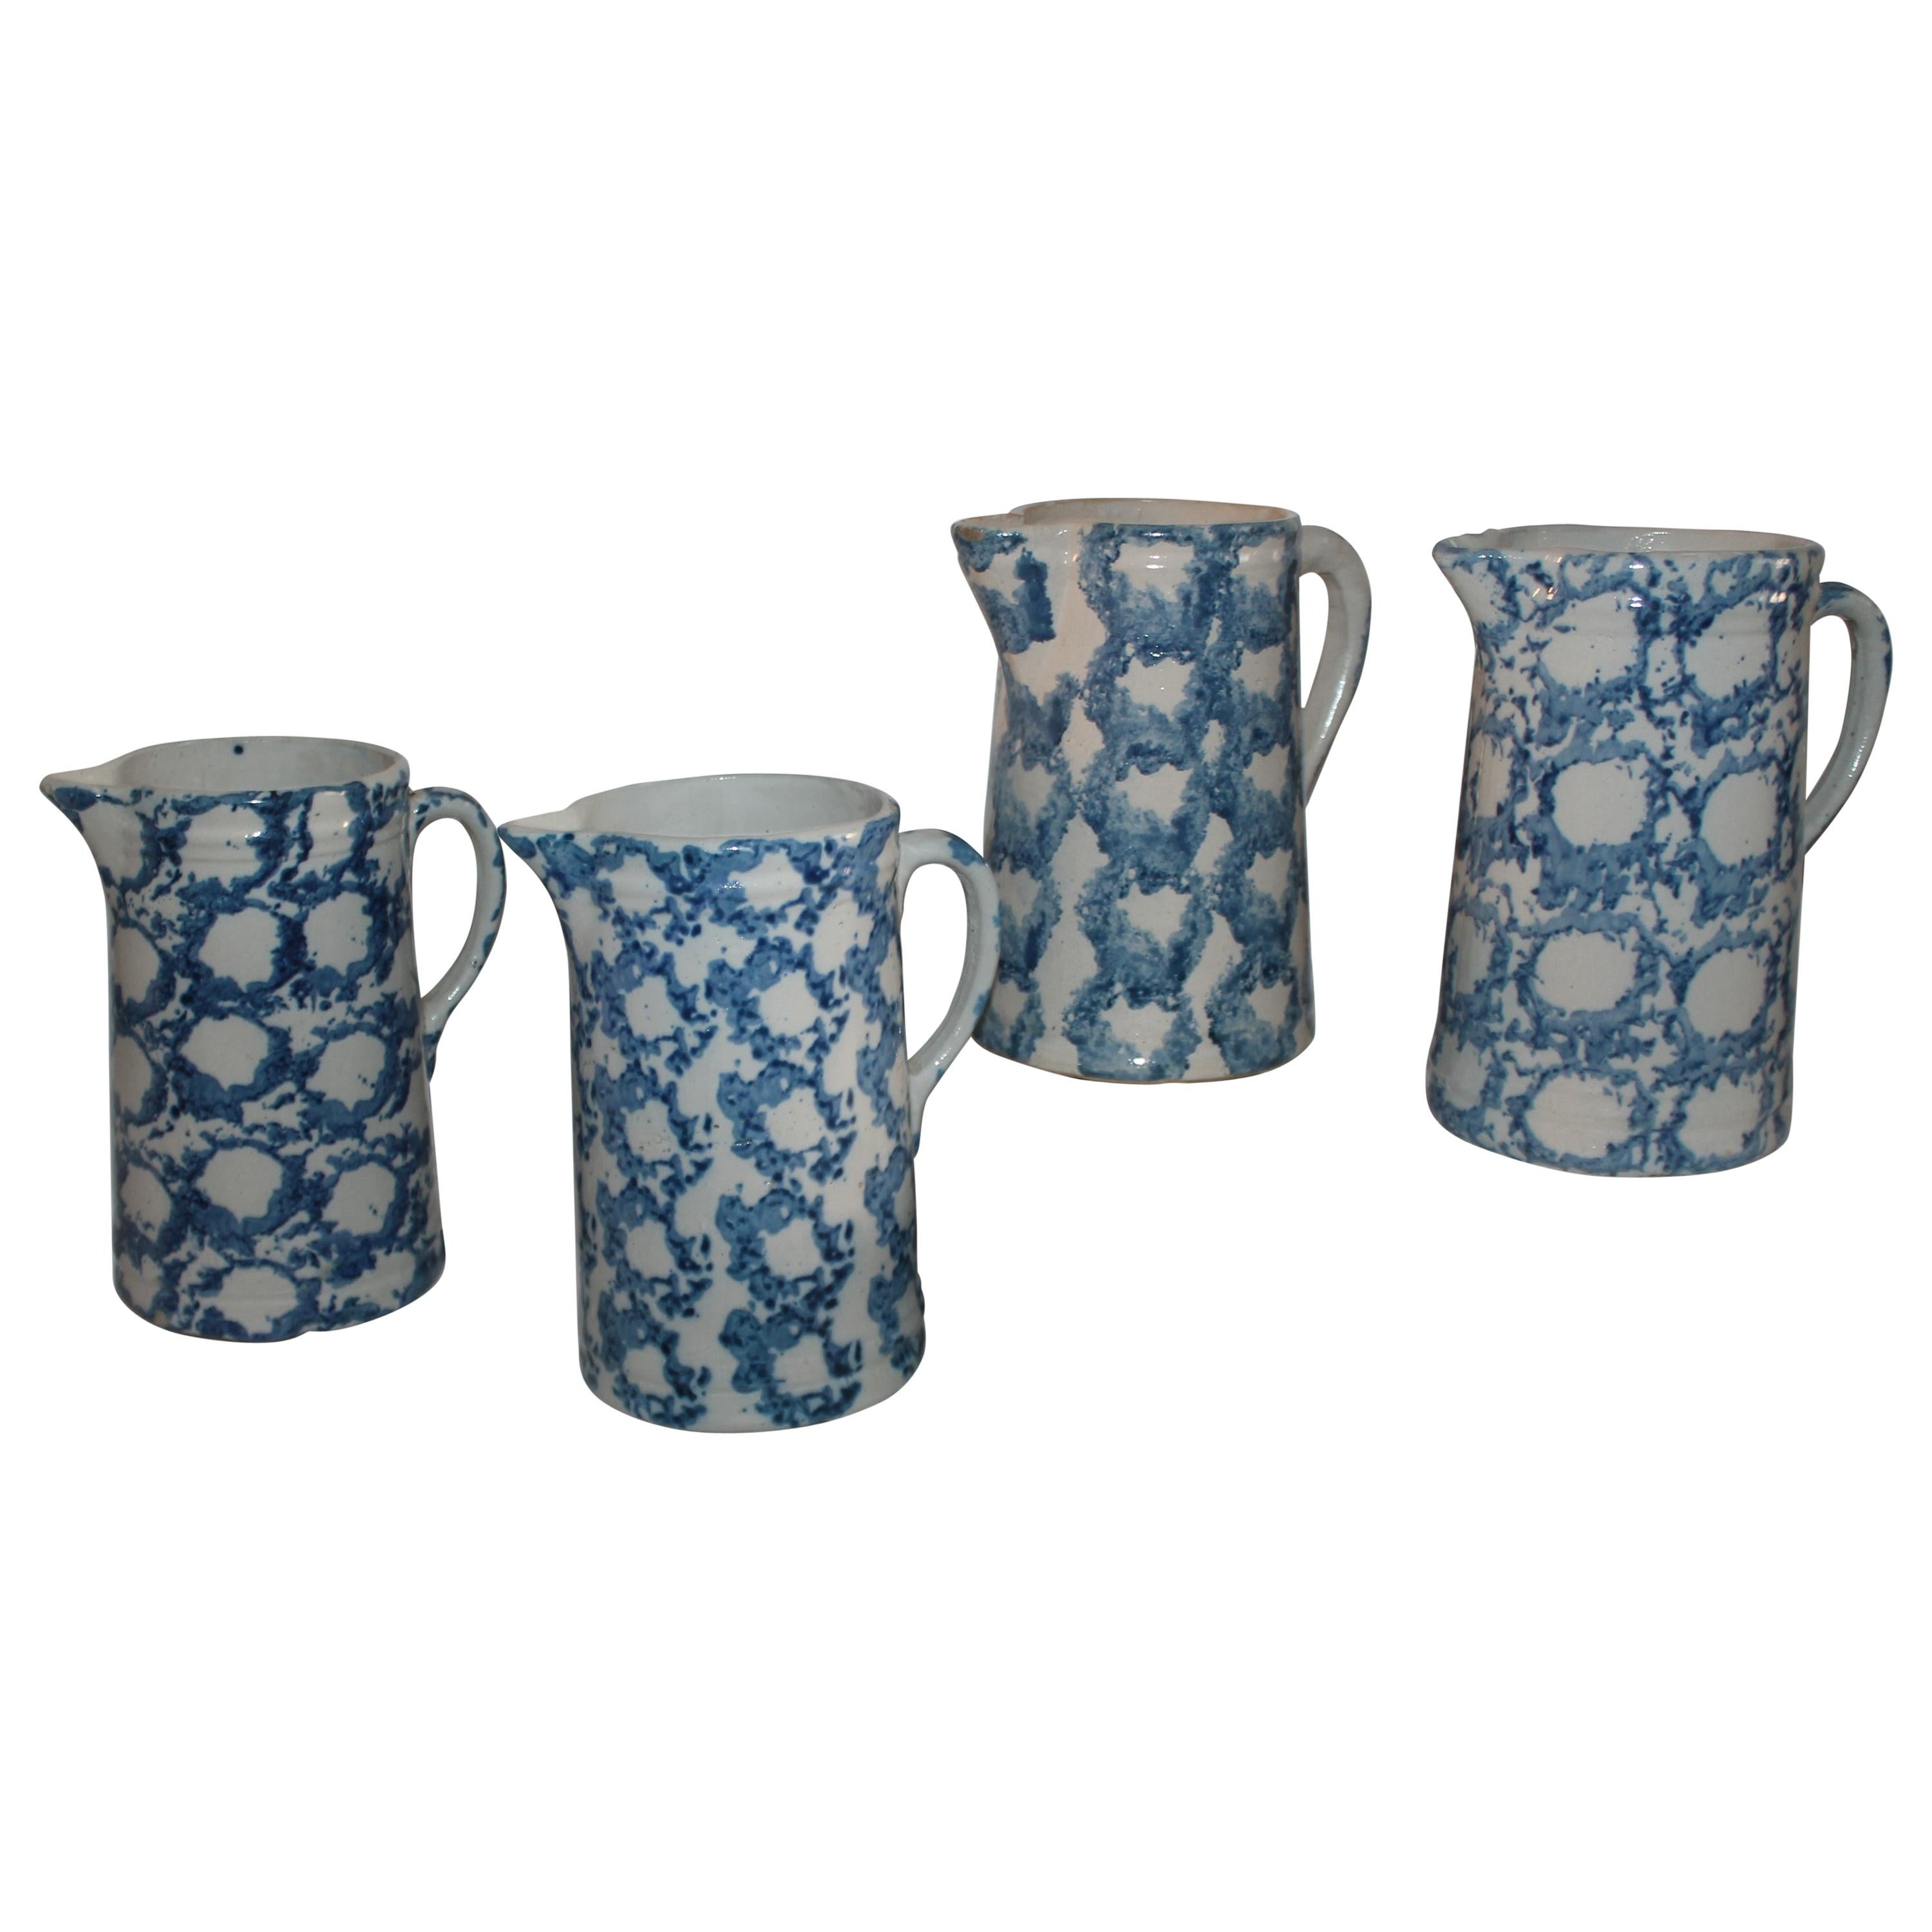 19Thc Sponge Ware Pottery Pitchers -Collection of Four